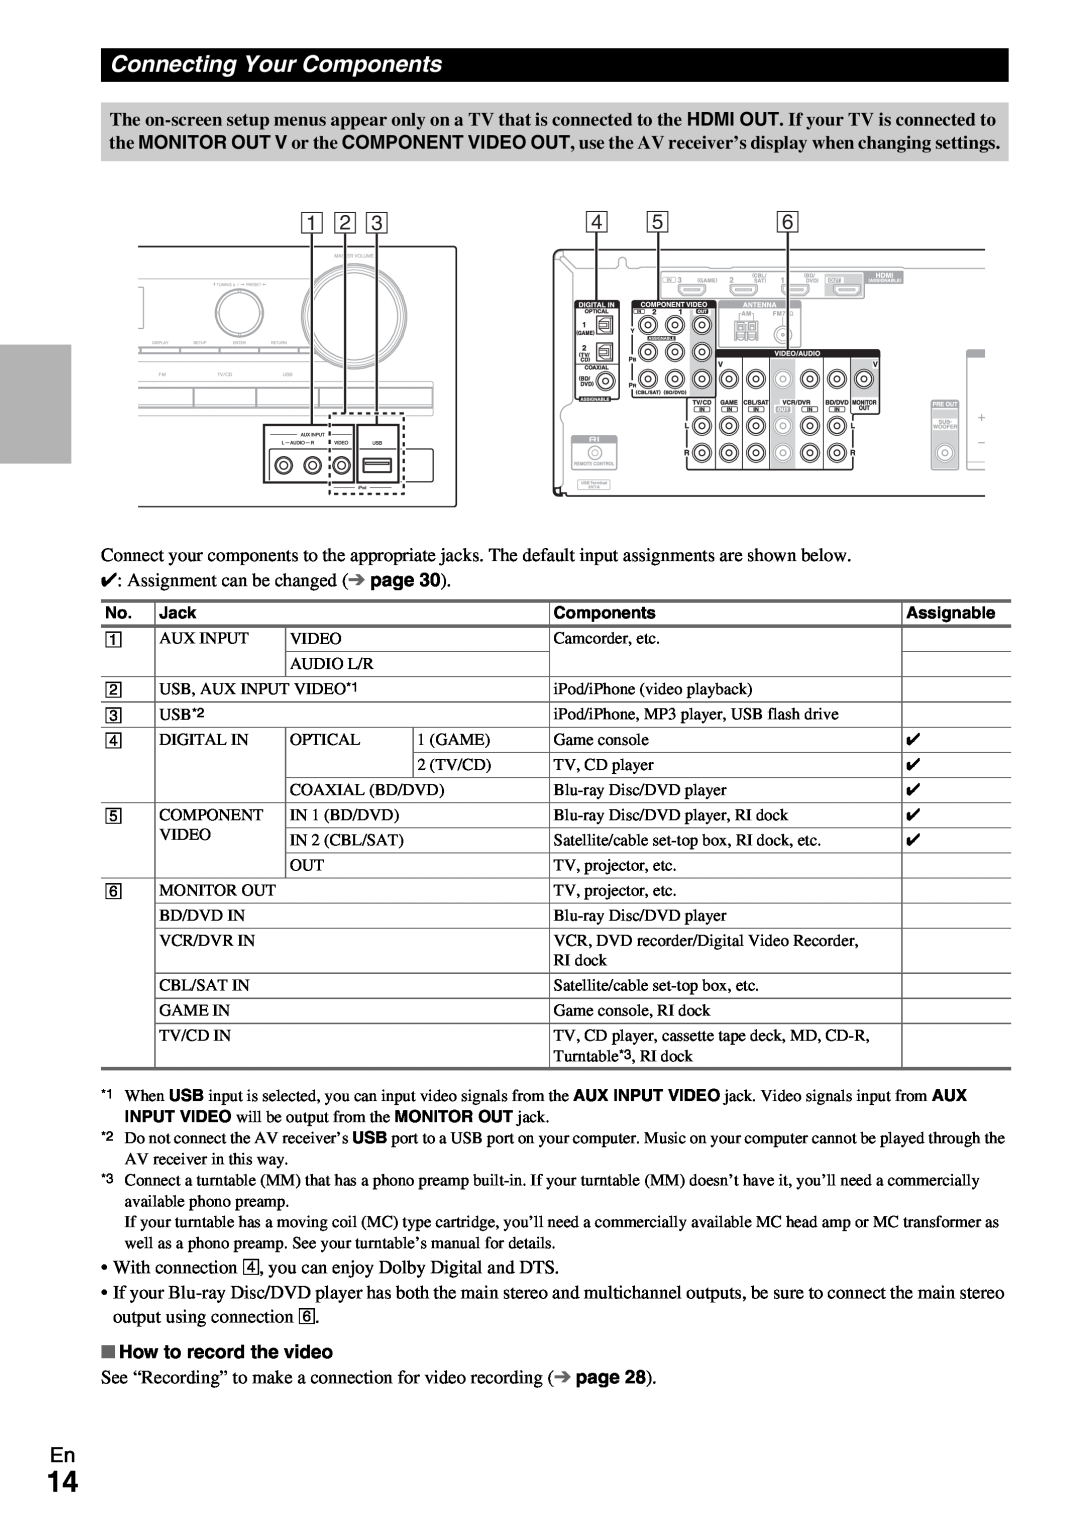 Onkyo TX-SR309 instruction manual Connecting Your Components, A B C D E F 